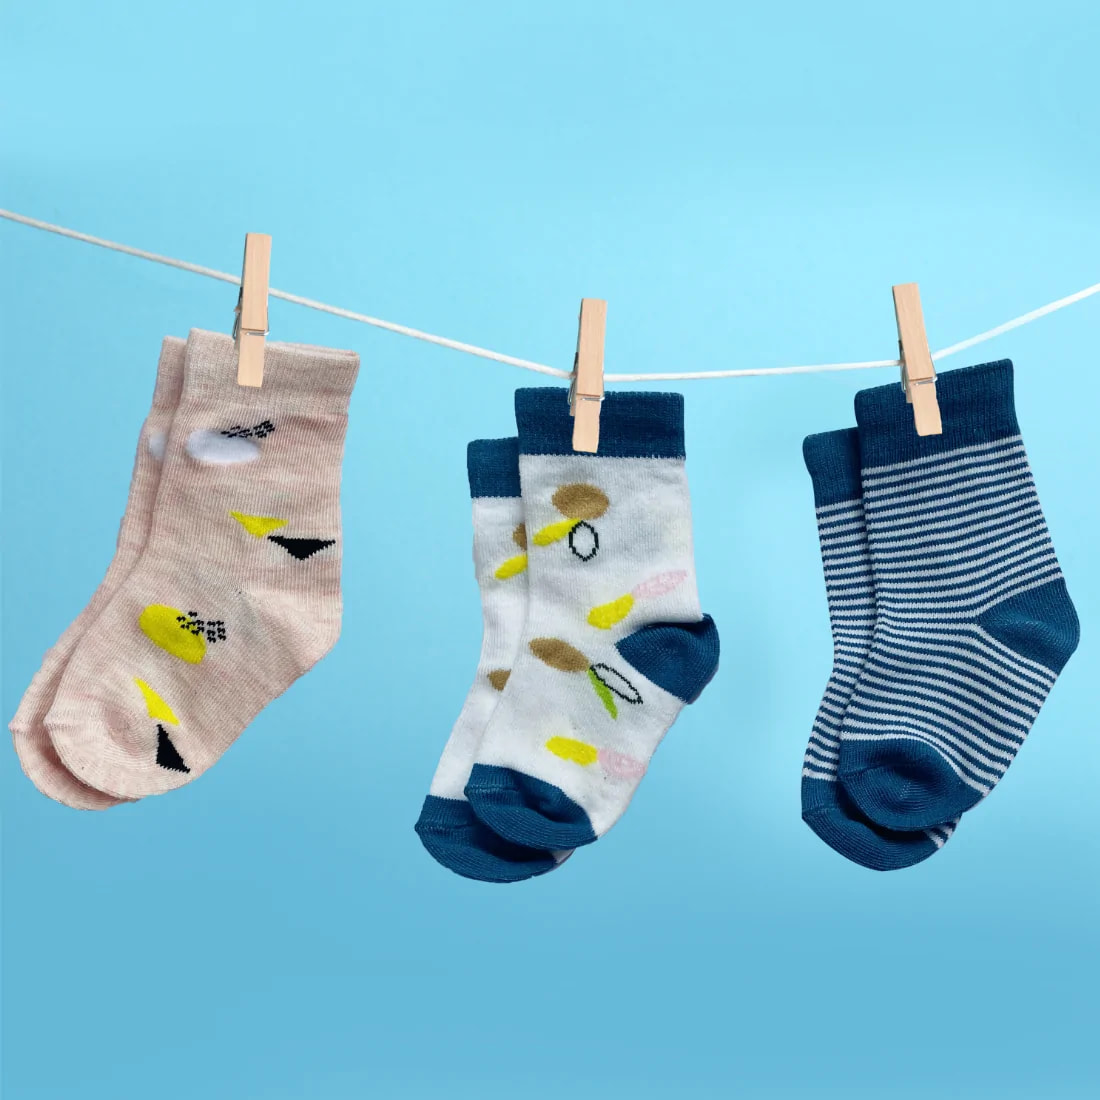 Antibacterial Baby Socks - Elasticated & Ankle Length - (12-24 Months) Unisex Blue Striped & Floral